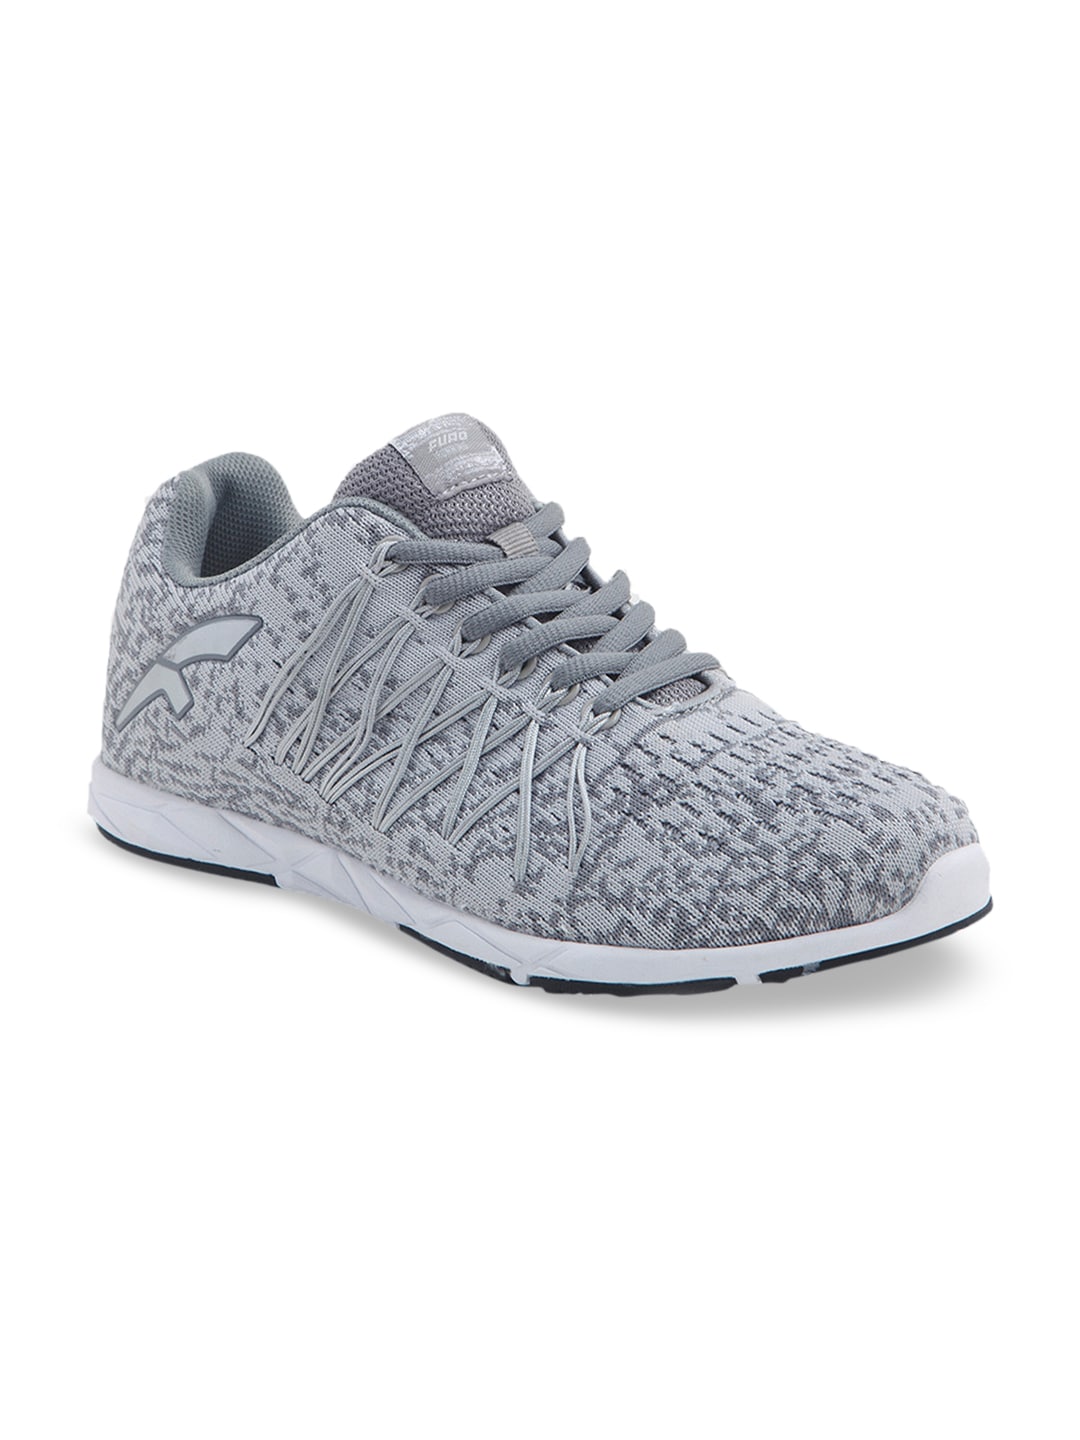 FURO by Red Chief Women Grey Mesh Running Shoes Price in India